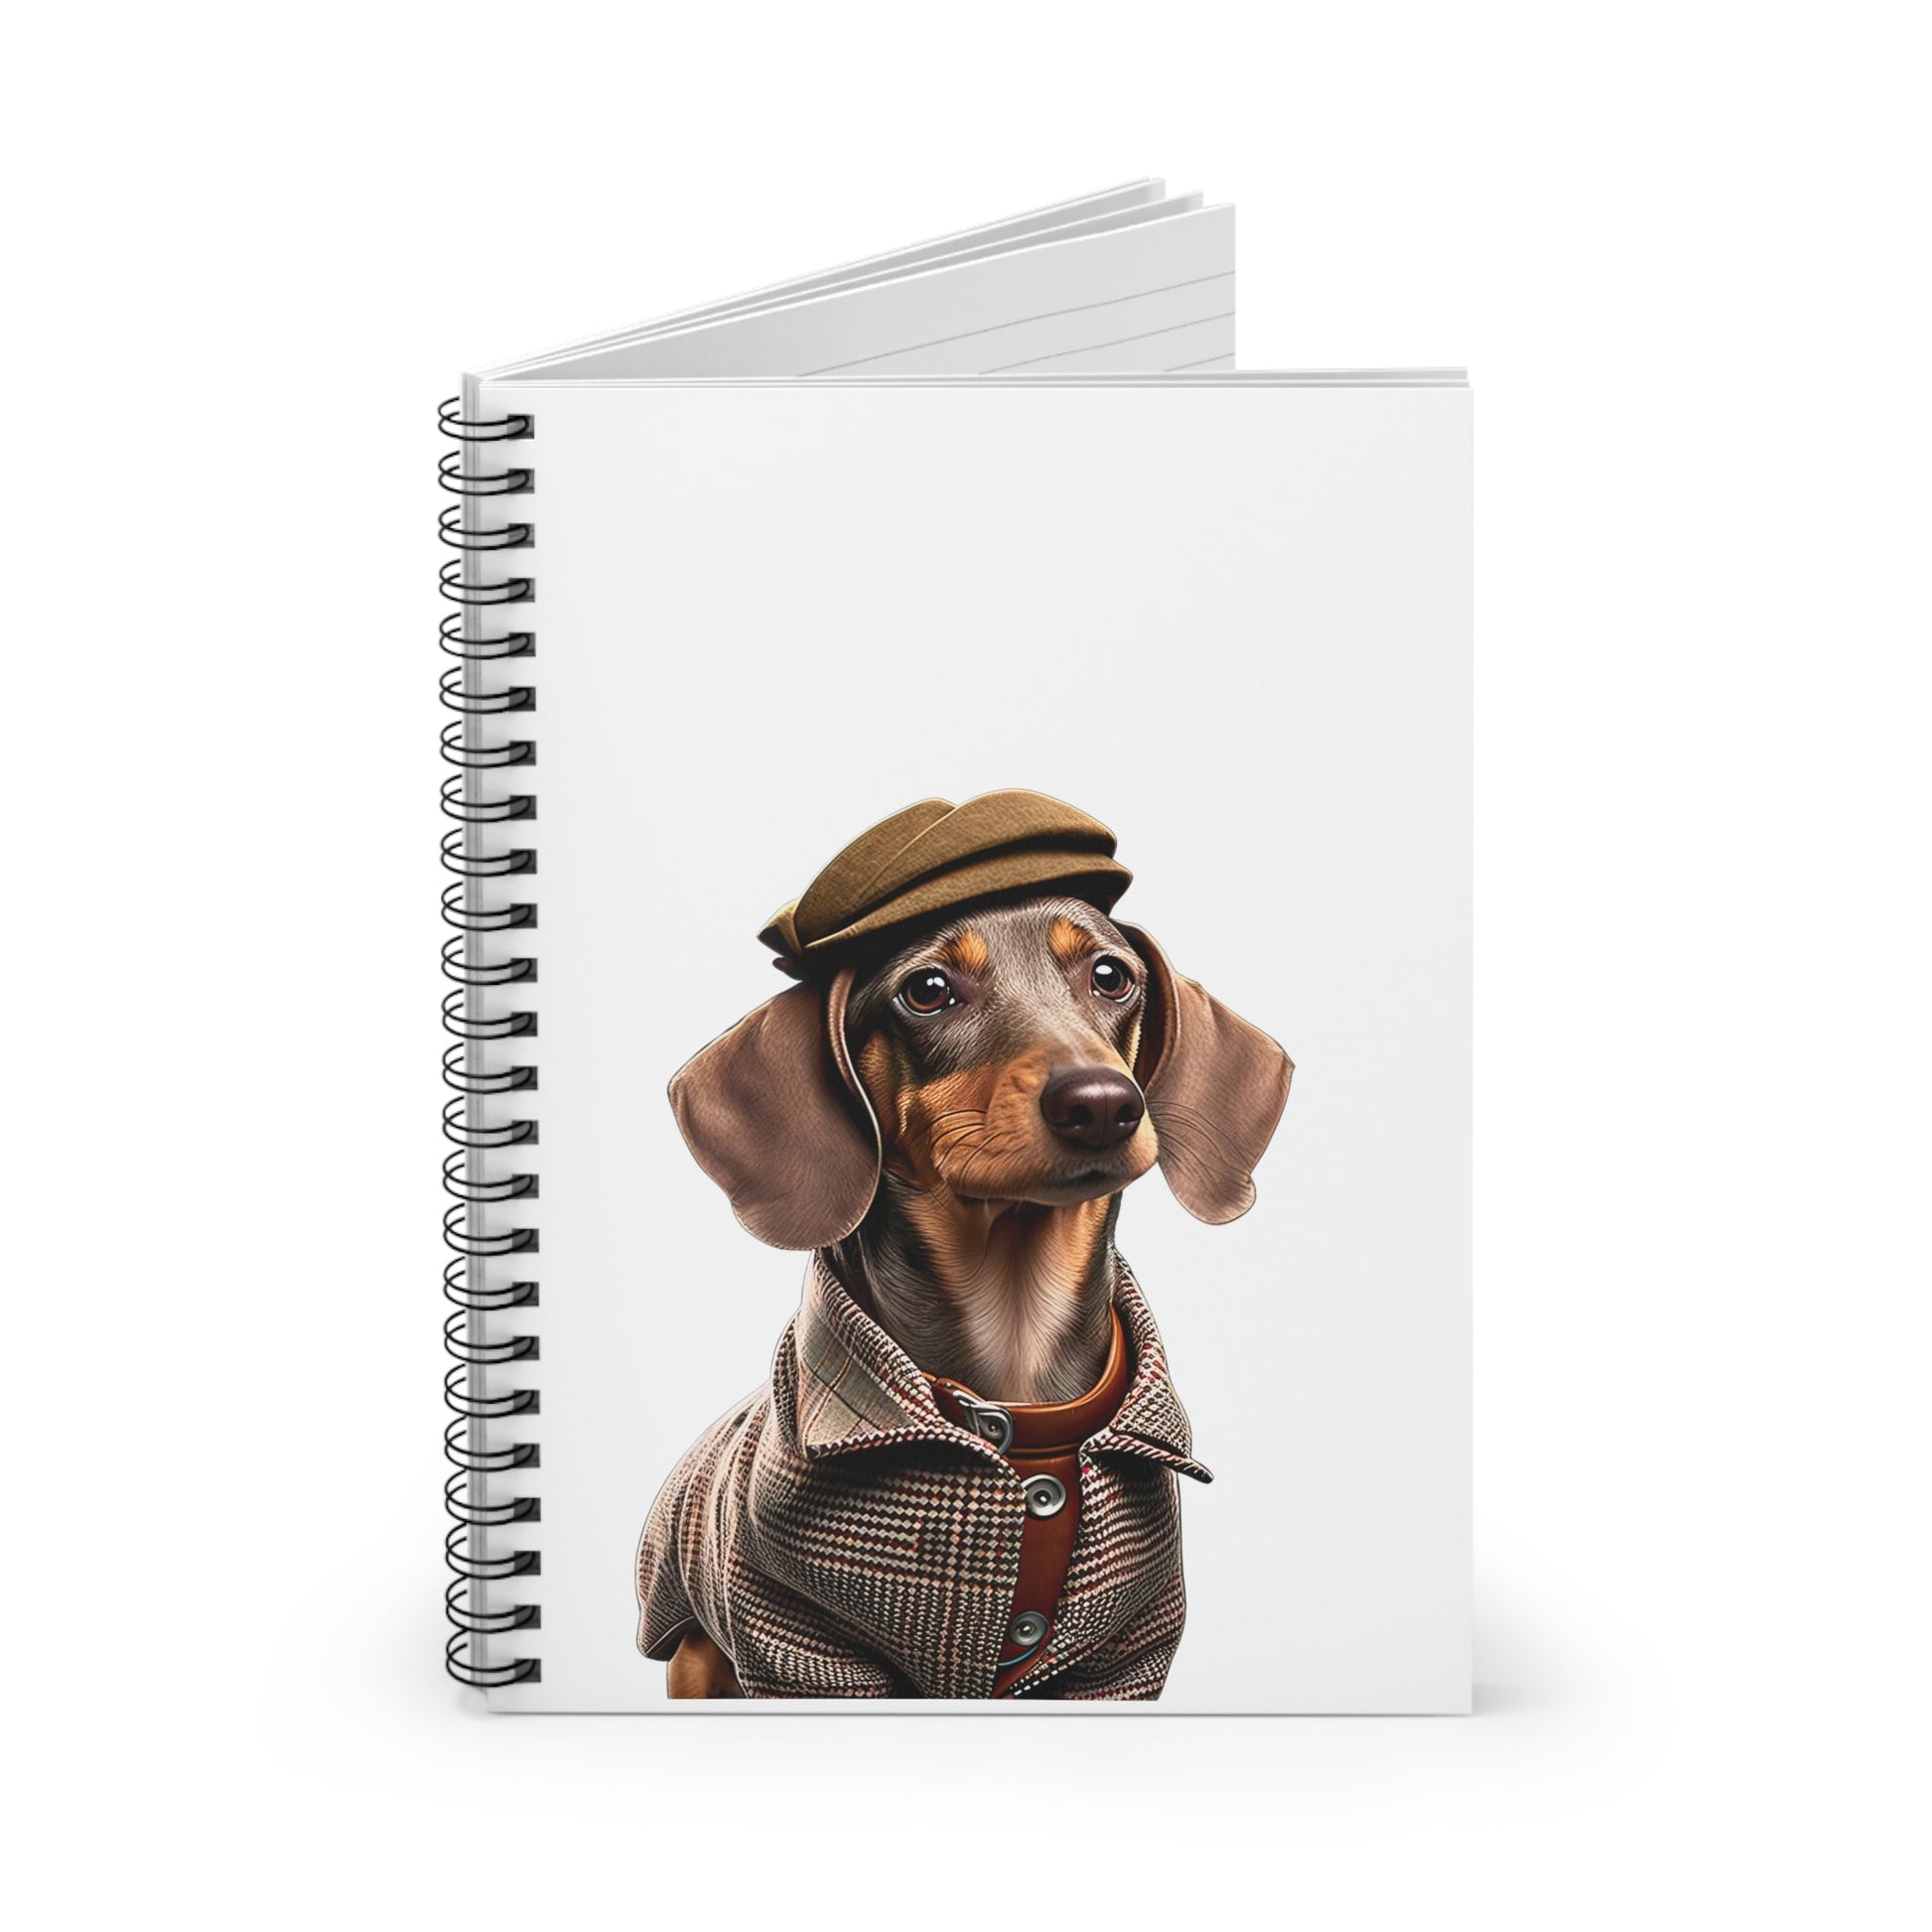 DONNY : Spiral Notebook - Ruled Line - Shaggy Chic